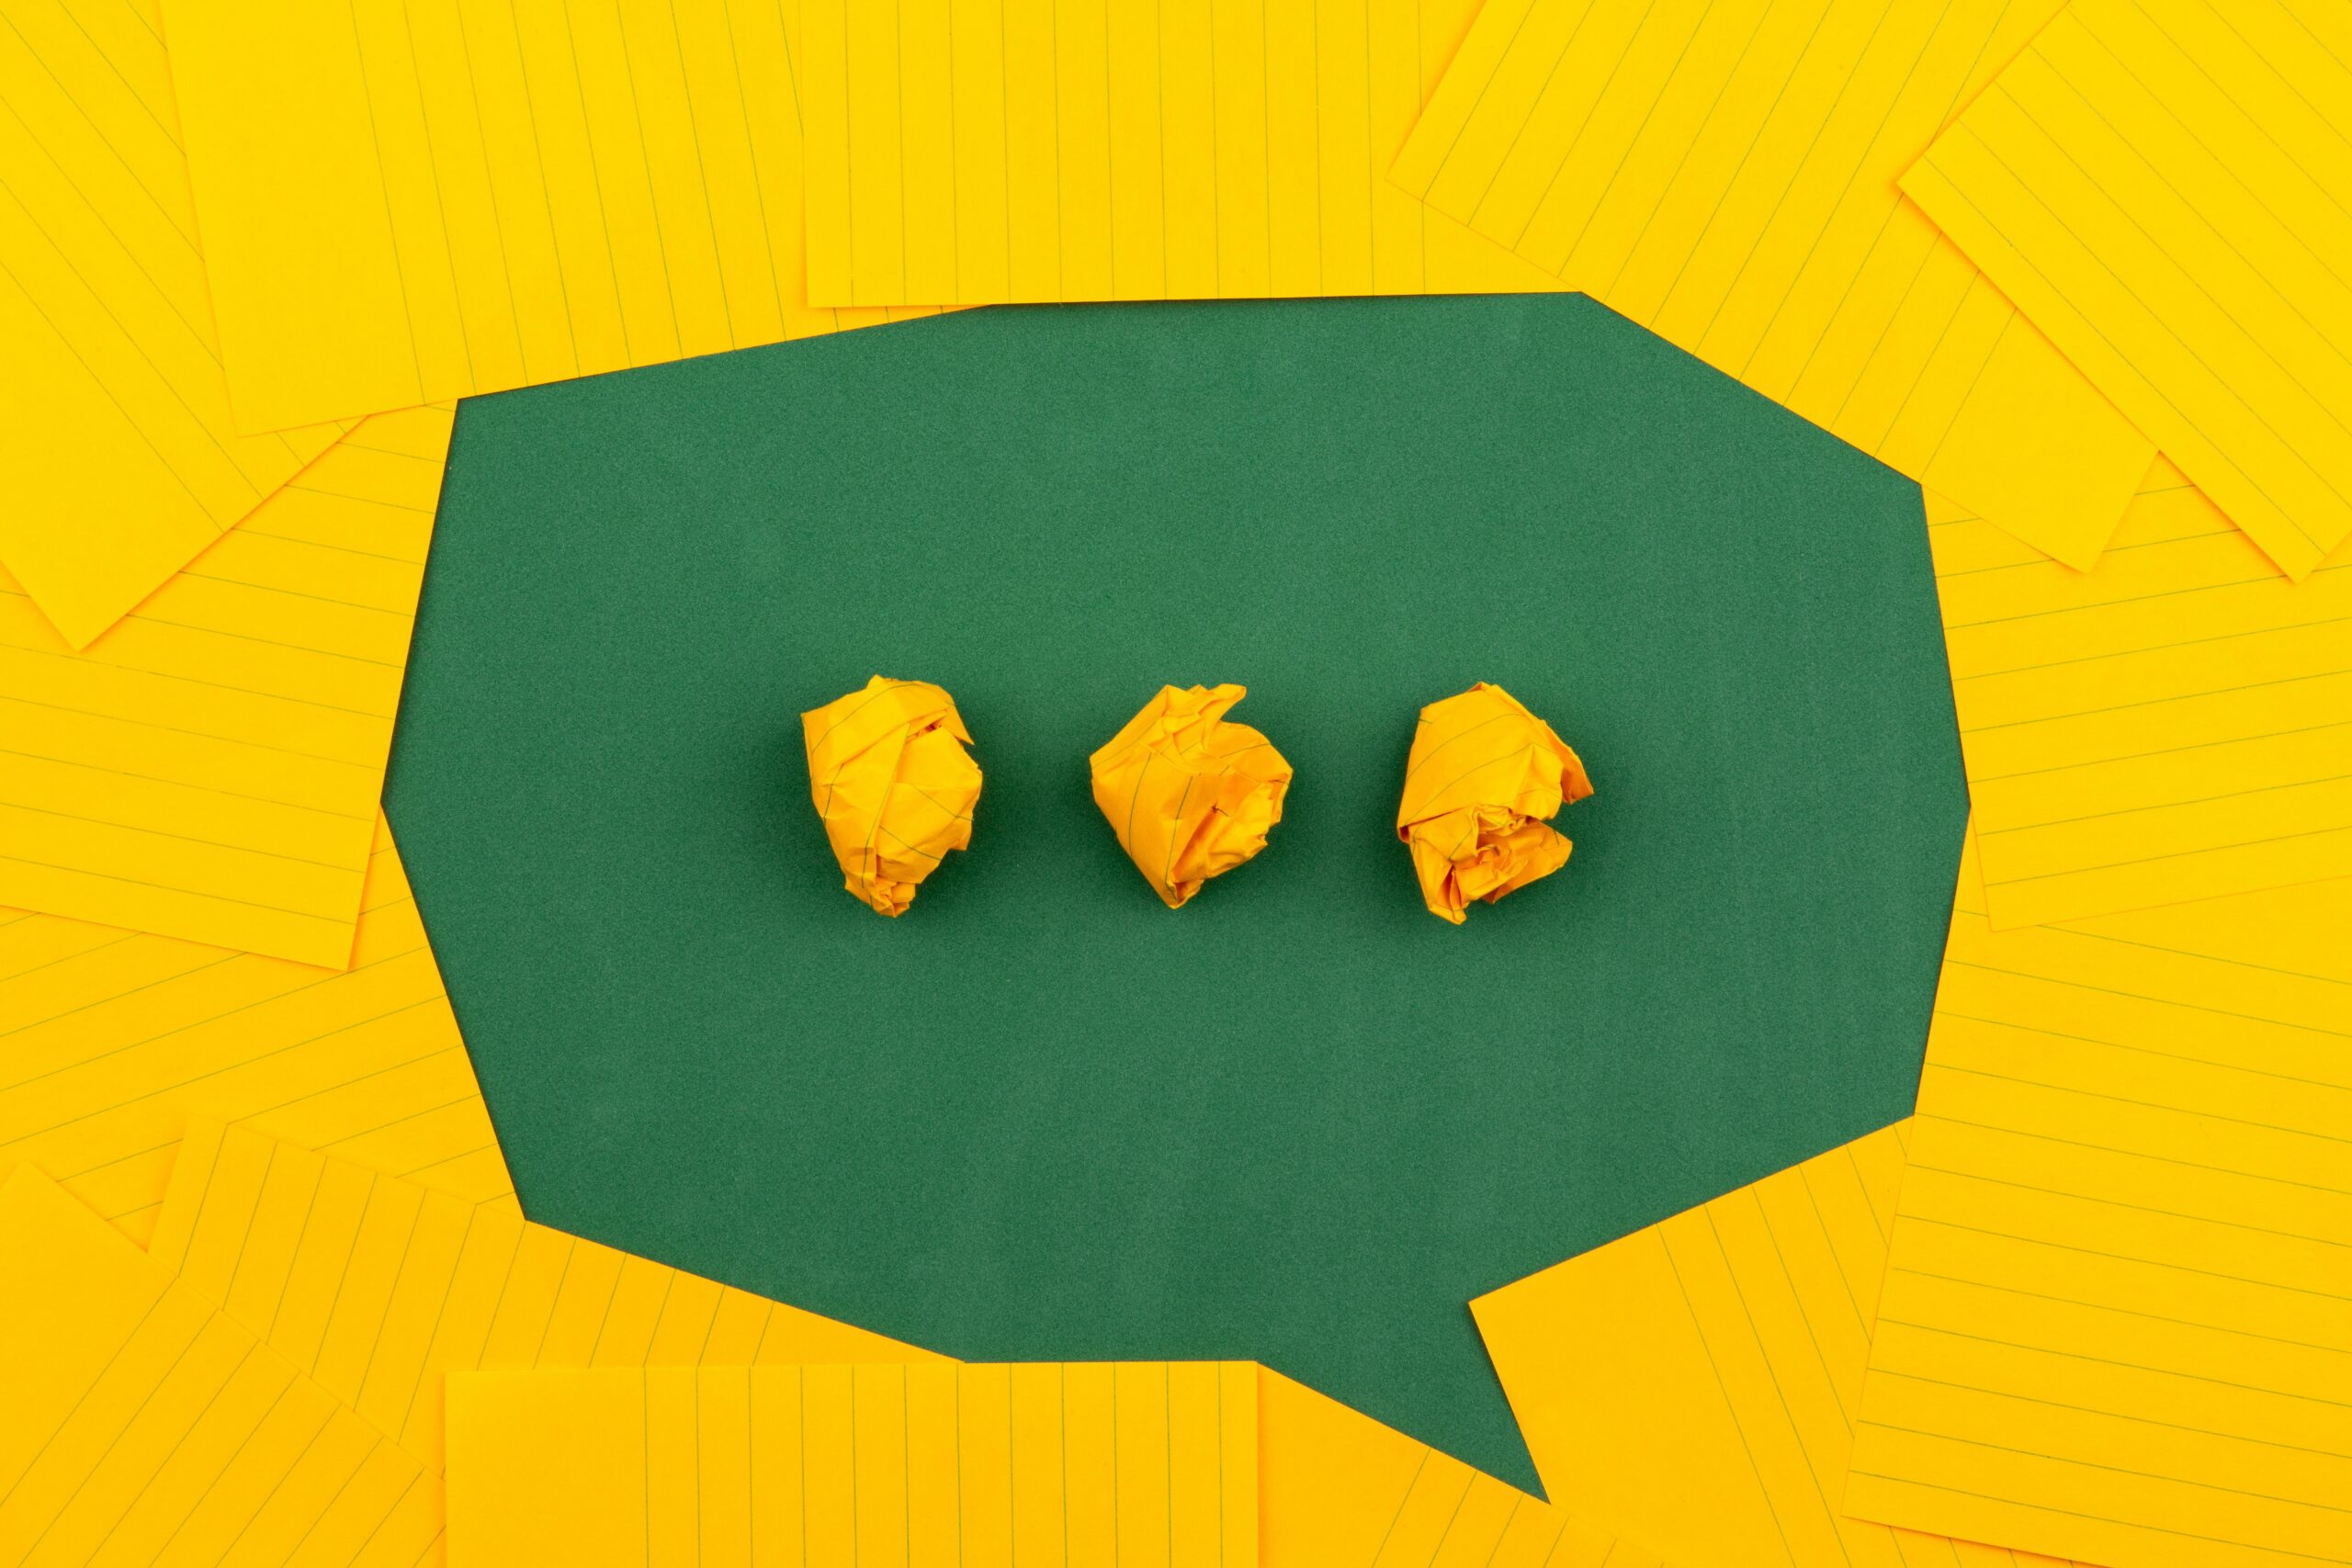 Picture of a speech bubble created using negative space – there is a green background carved into the shape of a bubble by a lot of yellow lined pieces of card. Inside the speech bubble, there are three scrumpled pieces of this yellow card which form an ellipsis. Photo by Volodymyr Hryshchenko on Unsplash